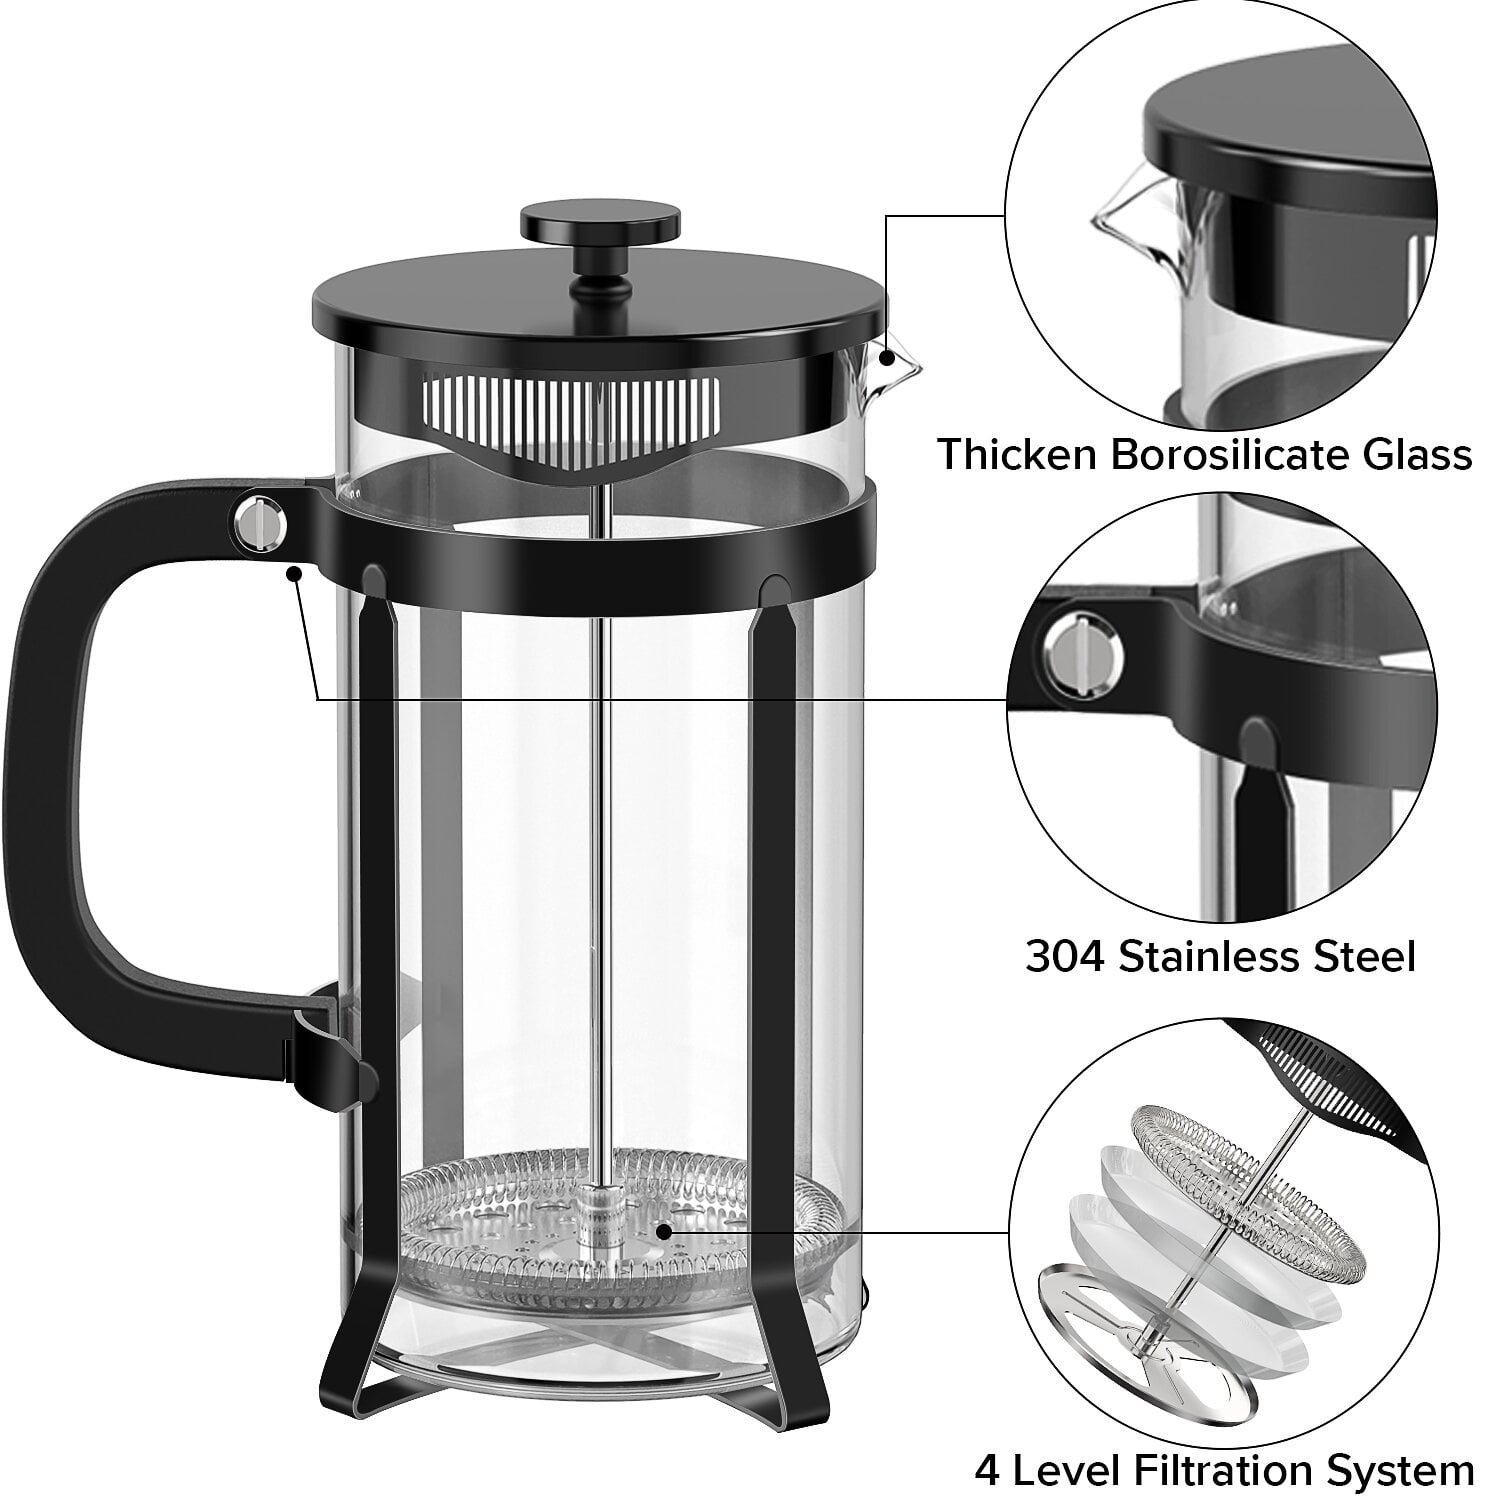 Cuisinox Double Walled Stainless Steel French Press with a silicone ga –  Inox Kitchenware